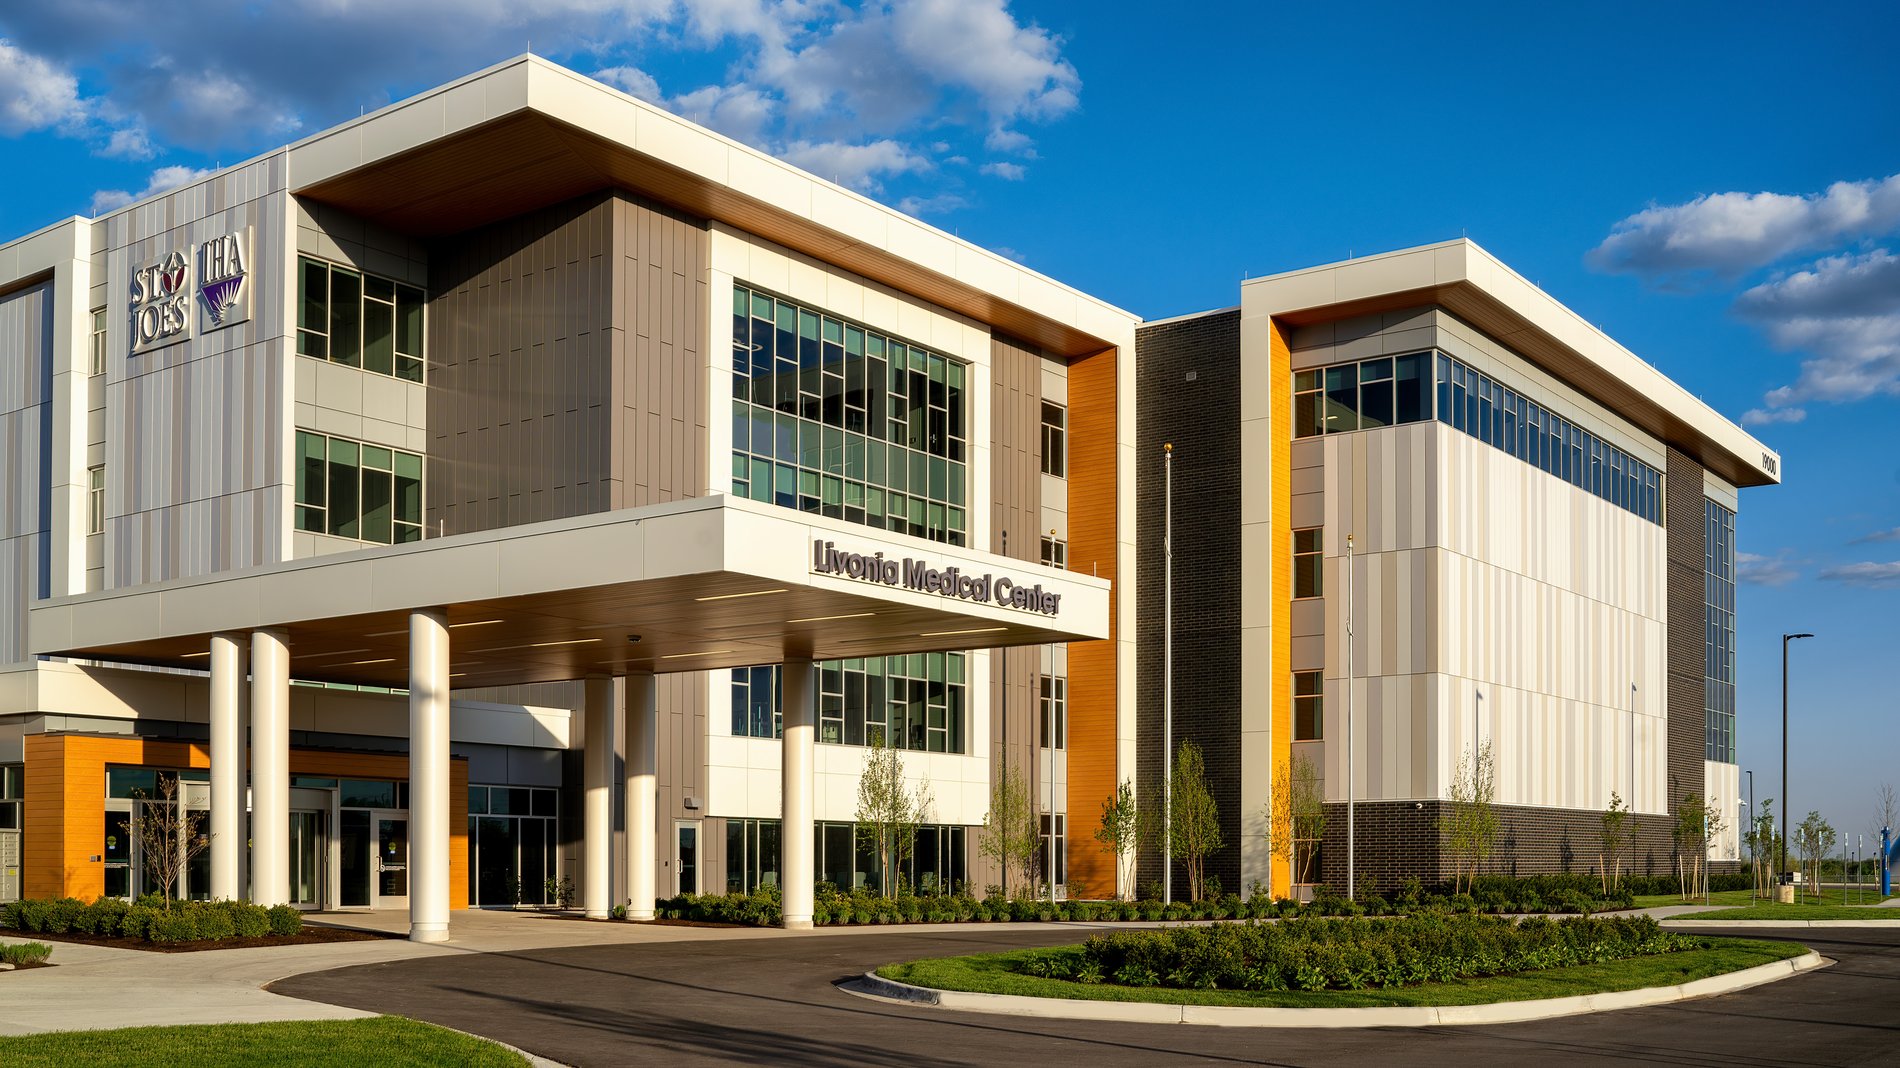 IHA Urgent Care Livonia is located in the Livonia Medical Center on the campus of Schoolcraft College.